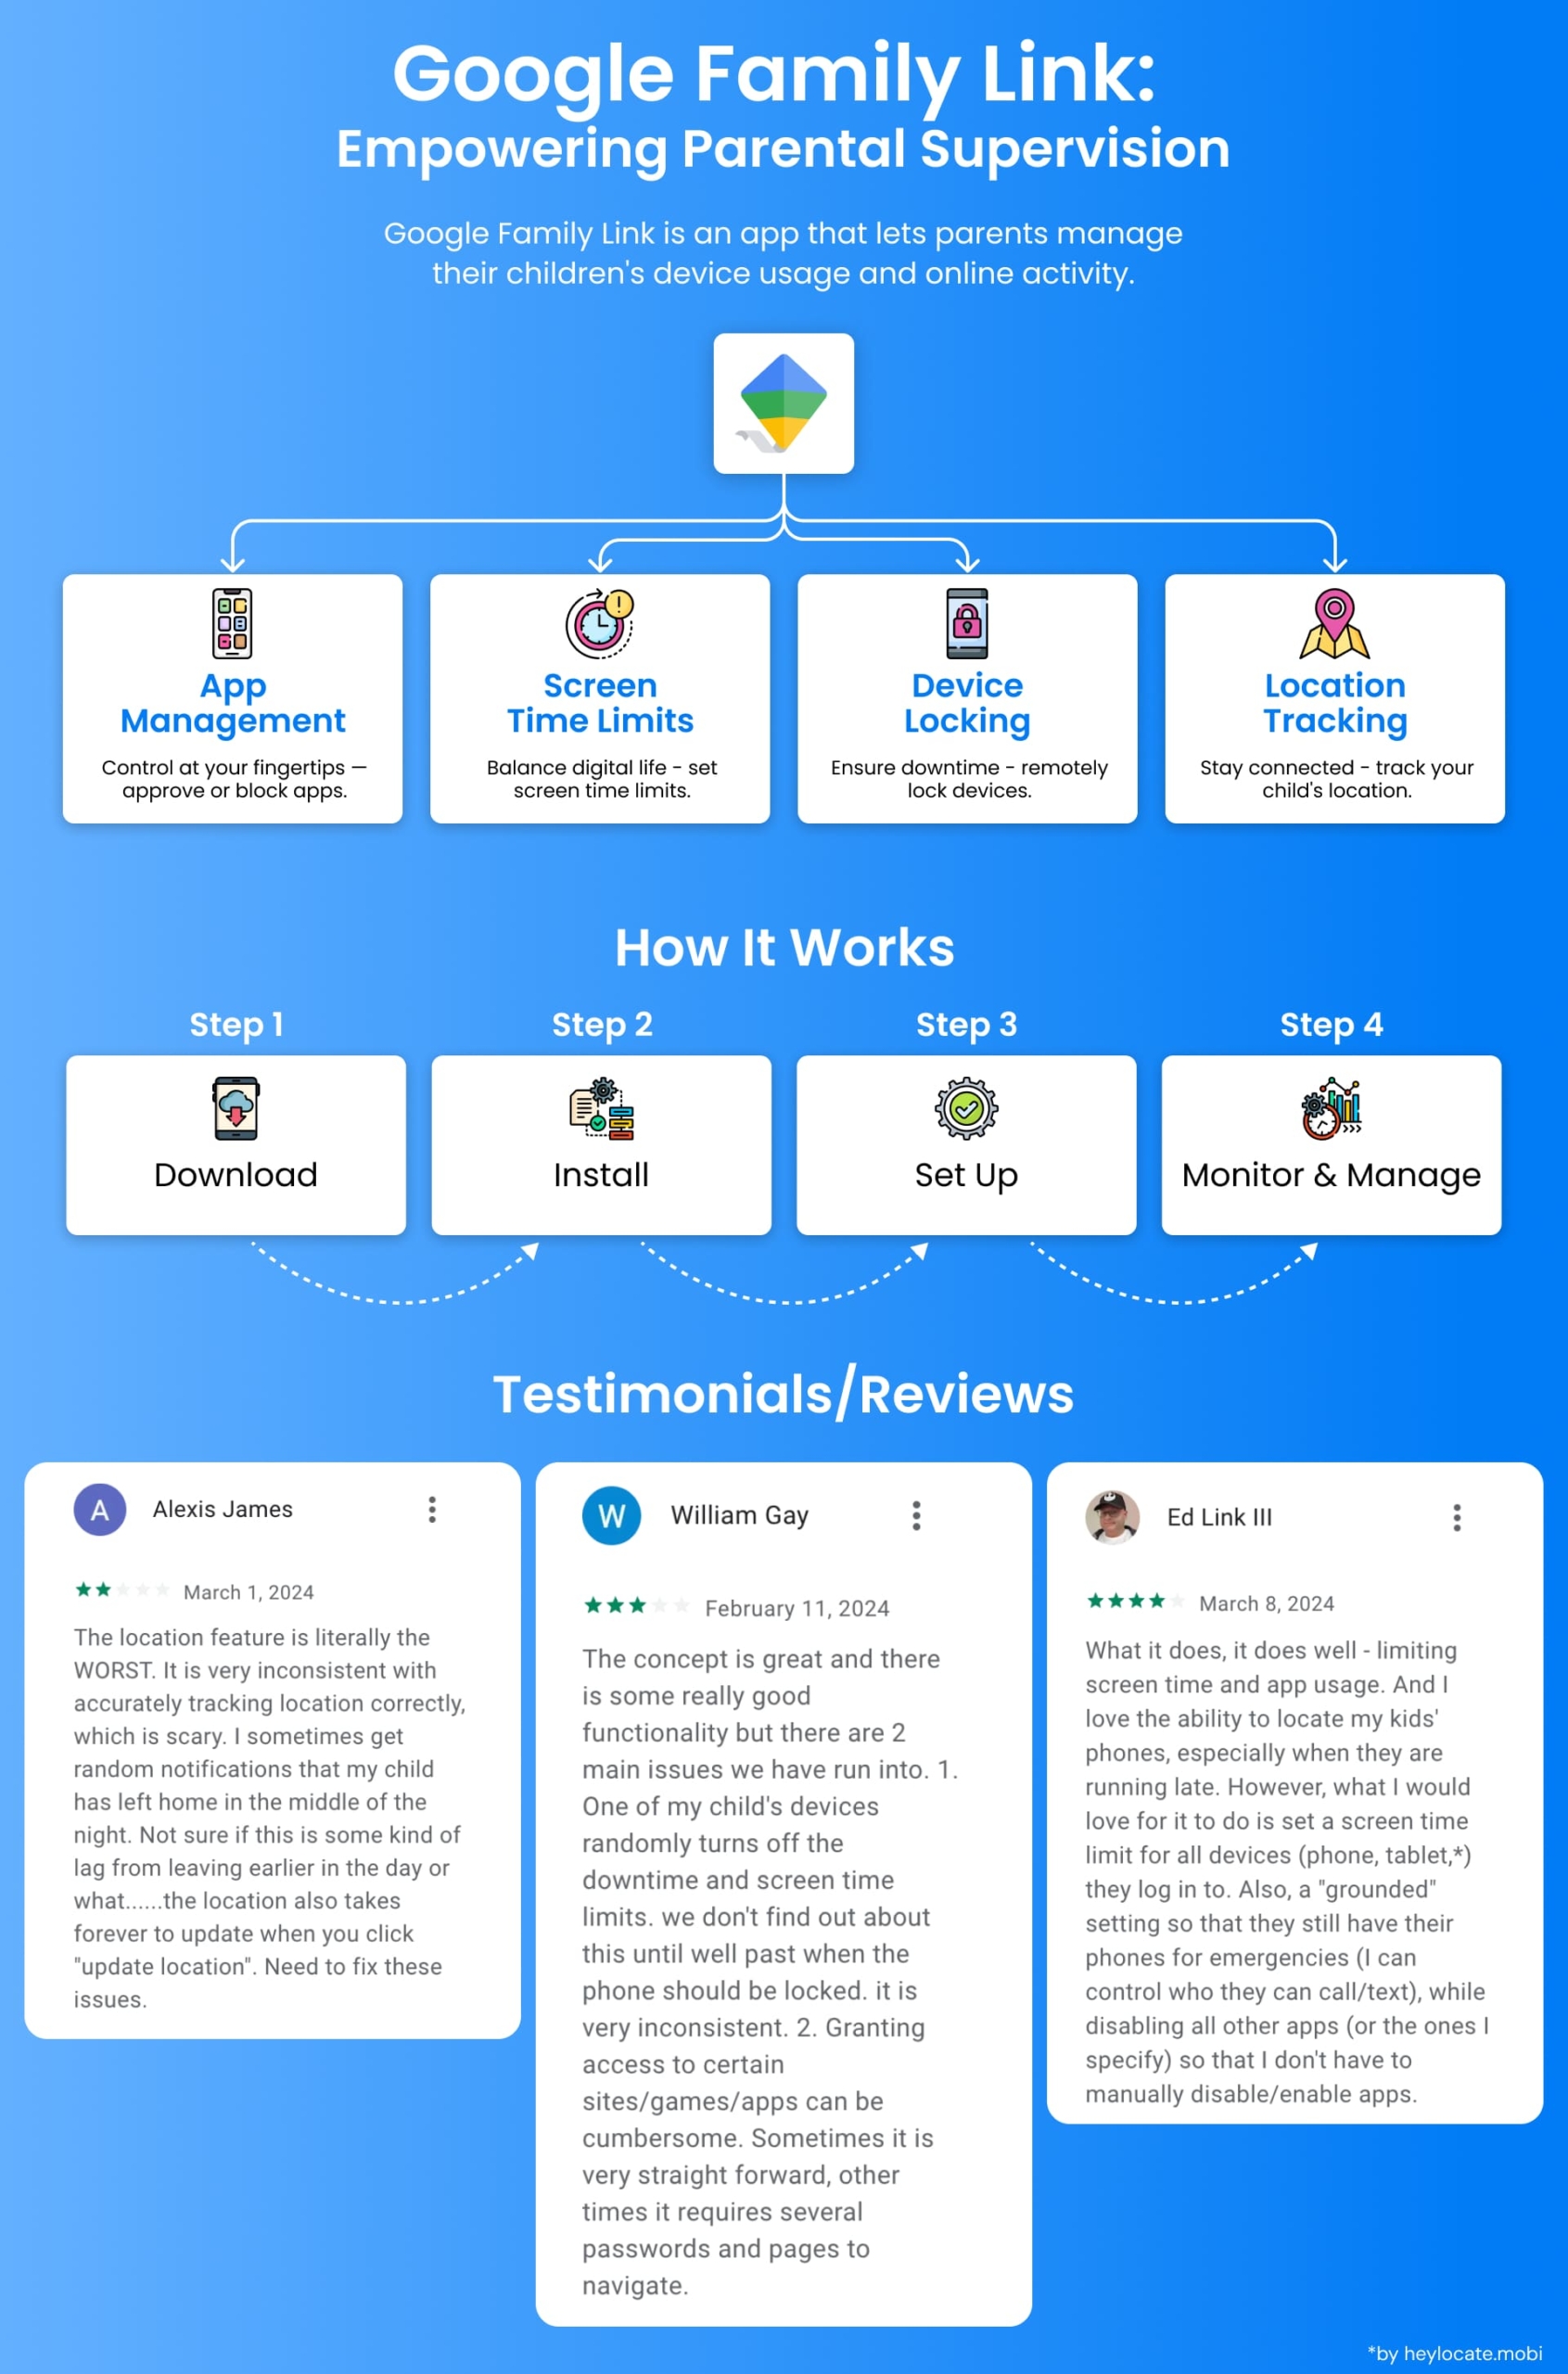 An infographic featuring the Google Family Link app's functionalities such as app management and location tracking, the setup process, and user testimonials about its impact on managing children's online activities